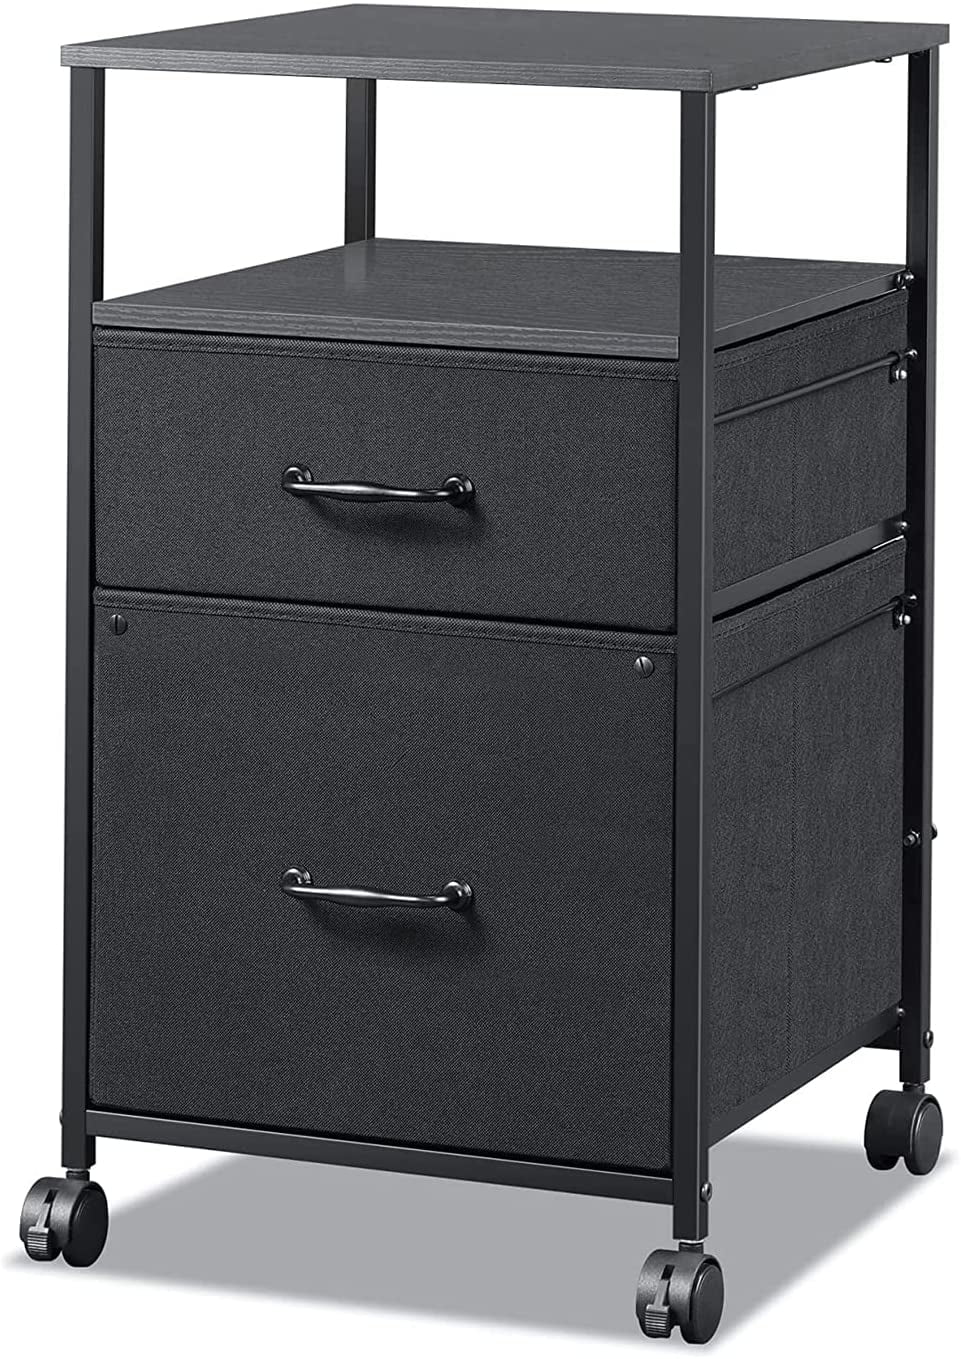 Black Commercial Vertical Cabinet DEVAISE 2-Drawer Mobile File Cabinet with Lock